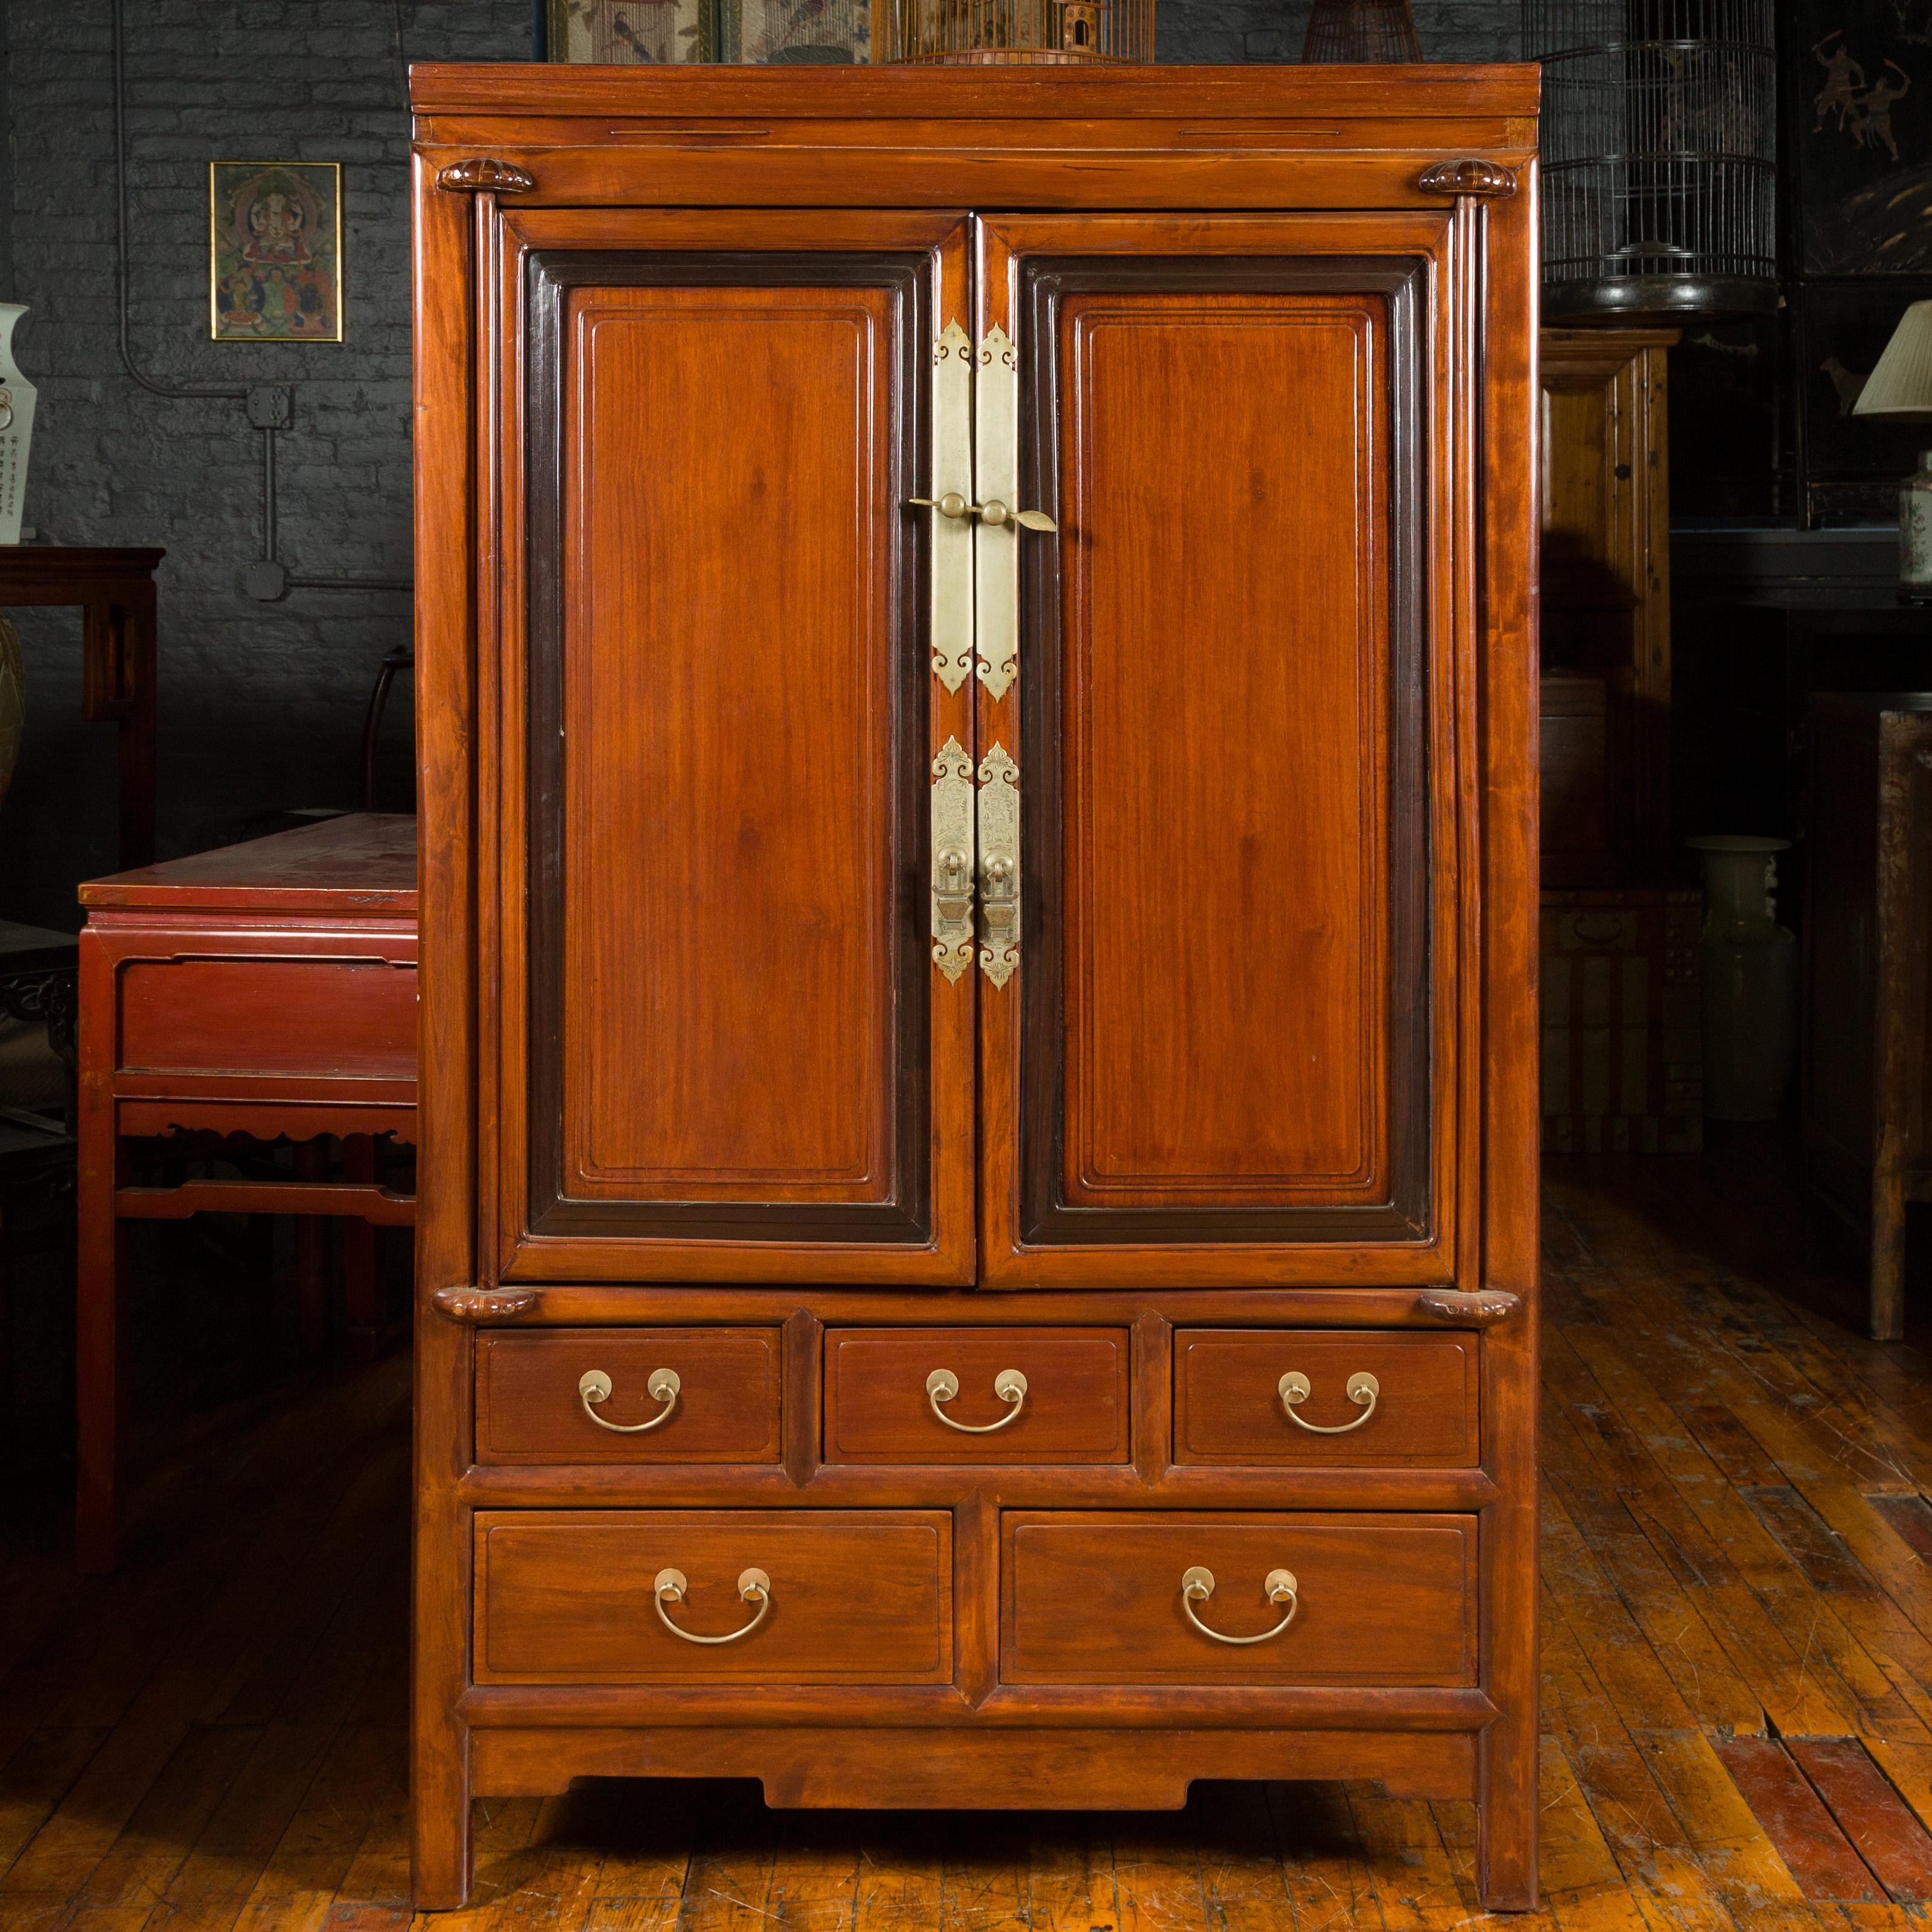 A two-toned cabinet from the 20th century, with doors and drawers. This exquisite two-toned cabinet from the 20th century features a harmonious blend of style and functionality. The tall structure showcases two doors adorned with dark inner molding,